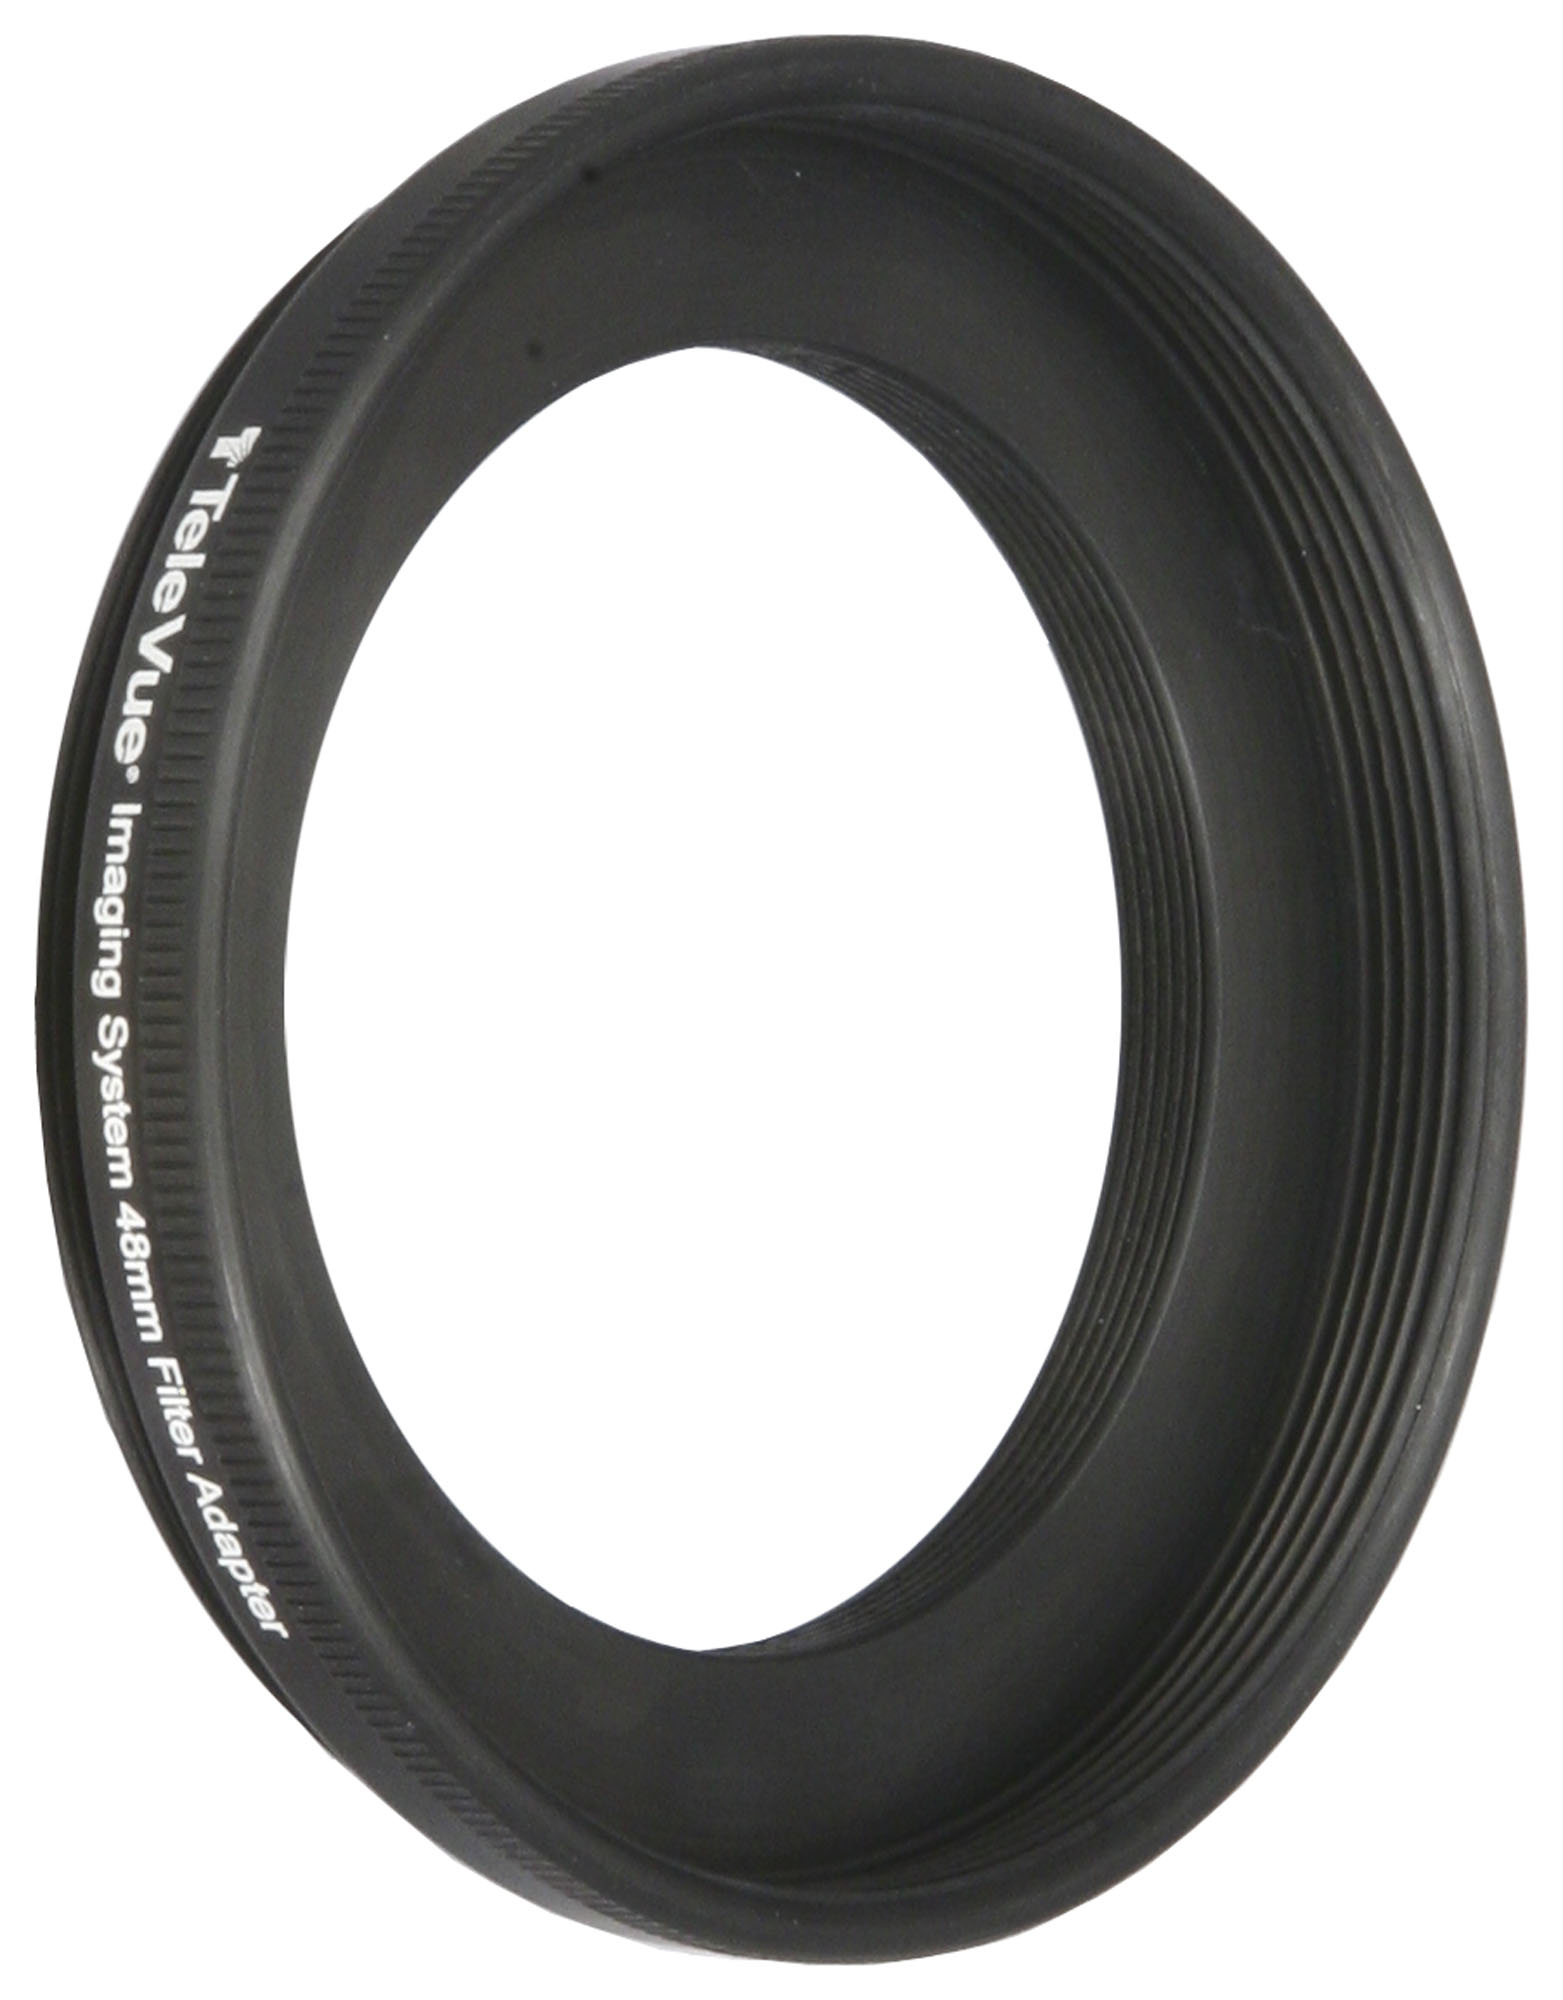 48-mm Filter Adapter for 2.4inch